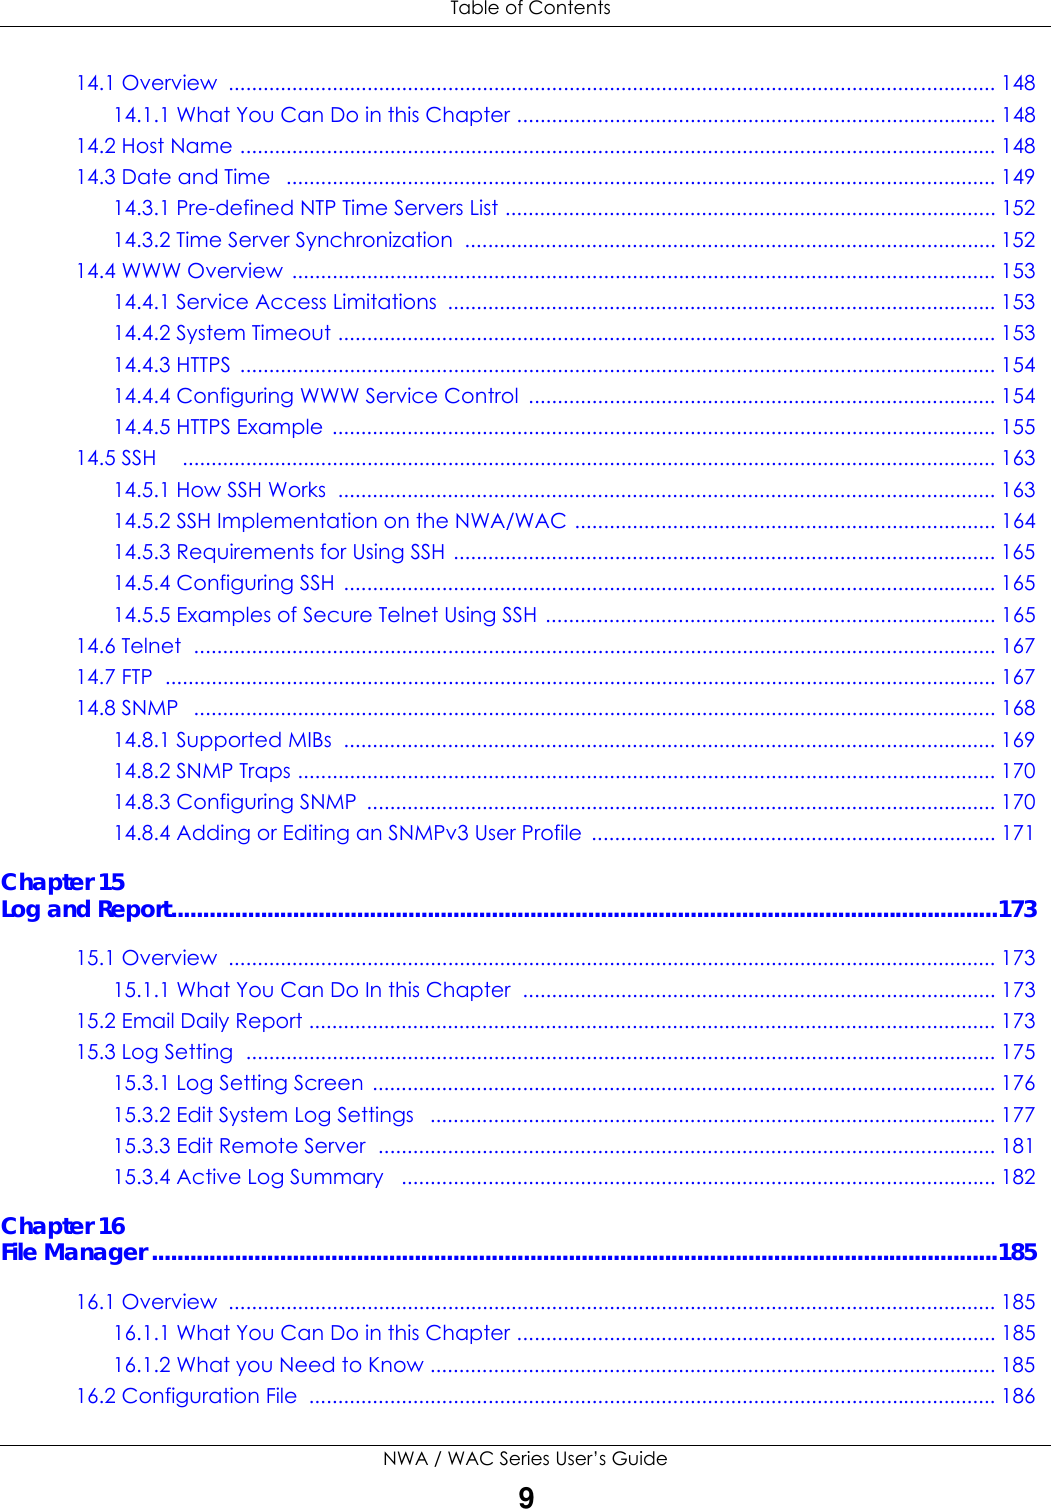  Table of ContentsNWA / WAC Series User’s Guide914.1 Overview  ..................................................................................................................................... 14814.1.1 What You Can Do in this Chapter ................................................................................... 14814.2 Host Name ................................................................................................................................... 14814.3 Date and Time   ........................................................................................................................... 14914.3.1 Pre-defined NTP Time Servers List ..................................................................................... 15214.3.2 Time Server Synchronization  ............................................................................................ 15214.4 WWW Overview .......................................................................................................................... 15314.4.1 Service Access Limitations  ............................................................................................... 15314.4.2 System Timeout .................................................................................................................. 15314.4.3 HTTPS  ................................................................................................................................... 15414.4.4 Configuring WWW Service Control  ................................................................................. 15414.4.5 HTTPS Example ................................................................................................................... 15514.5 SSH    ............................................................................................................................................. 16314.5.1 How SSH Works  .................................................................................................................. 16314.5.2 SSH Implementation on the NWA/WAC ......................................................................... 16414.5.3 Requirements for Using SSH ..............................................................................................16514.5.4 Configuring SSH  ................................................................................................................. 16514.5.5 Examples of Secure Telnet Using SSH .............................................................................. 16514.6 Telnet  ........................................................................................................................................... 16714.7 FTP  ................................................................................................................................................ 16714.8 SNMP   ........................................................................................................................................... 16814.8.1 Supported MIBs  ................................................................................................................. 16914.8.2 SNMP Traps ......................................................................................................................... 17014.8.3 Configuring SNMP  ............................................................................................................. 17014.8.4 Adding or Editing an SNMPv3 User Profile  ...................................................................... 171Chapter 15Log and Report.................................................................................................................................17315.1 Overview  ..................................................................................................................................... 17315.1.1 What You Can Do In this Chapter  .................................................................................. 17315.2 Email Daily Report ....................................................................................................................... 17315.3 Log Setting  .................................................................................................................................. 17515.3.1 Log Setting Screen  ............................................................................................................ 17615.3.2 Edit System Log Settings   .................................................................................................. 17715.3.3 Edit Remote Server  ........................................................................................................... 18115.3.4 Active Log Summary   ....................................................................................................... 182Chapter 16File Manager ....................................................................................................................................18516.1 Overview  ..................................................................................................................................... 18516.1.1 What You Can Do in this Chapter ................................................................................... 18516.1.2 What you Need to Know .................................................................................................. 18516.2 Configuration File  ....................................................................................................................... 186